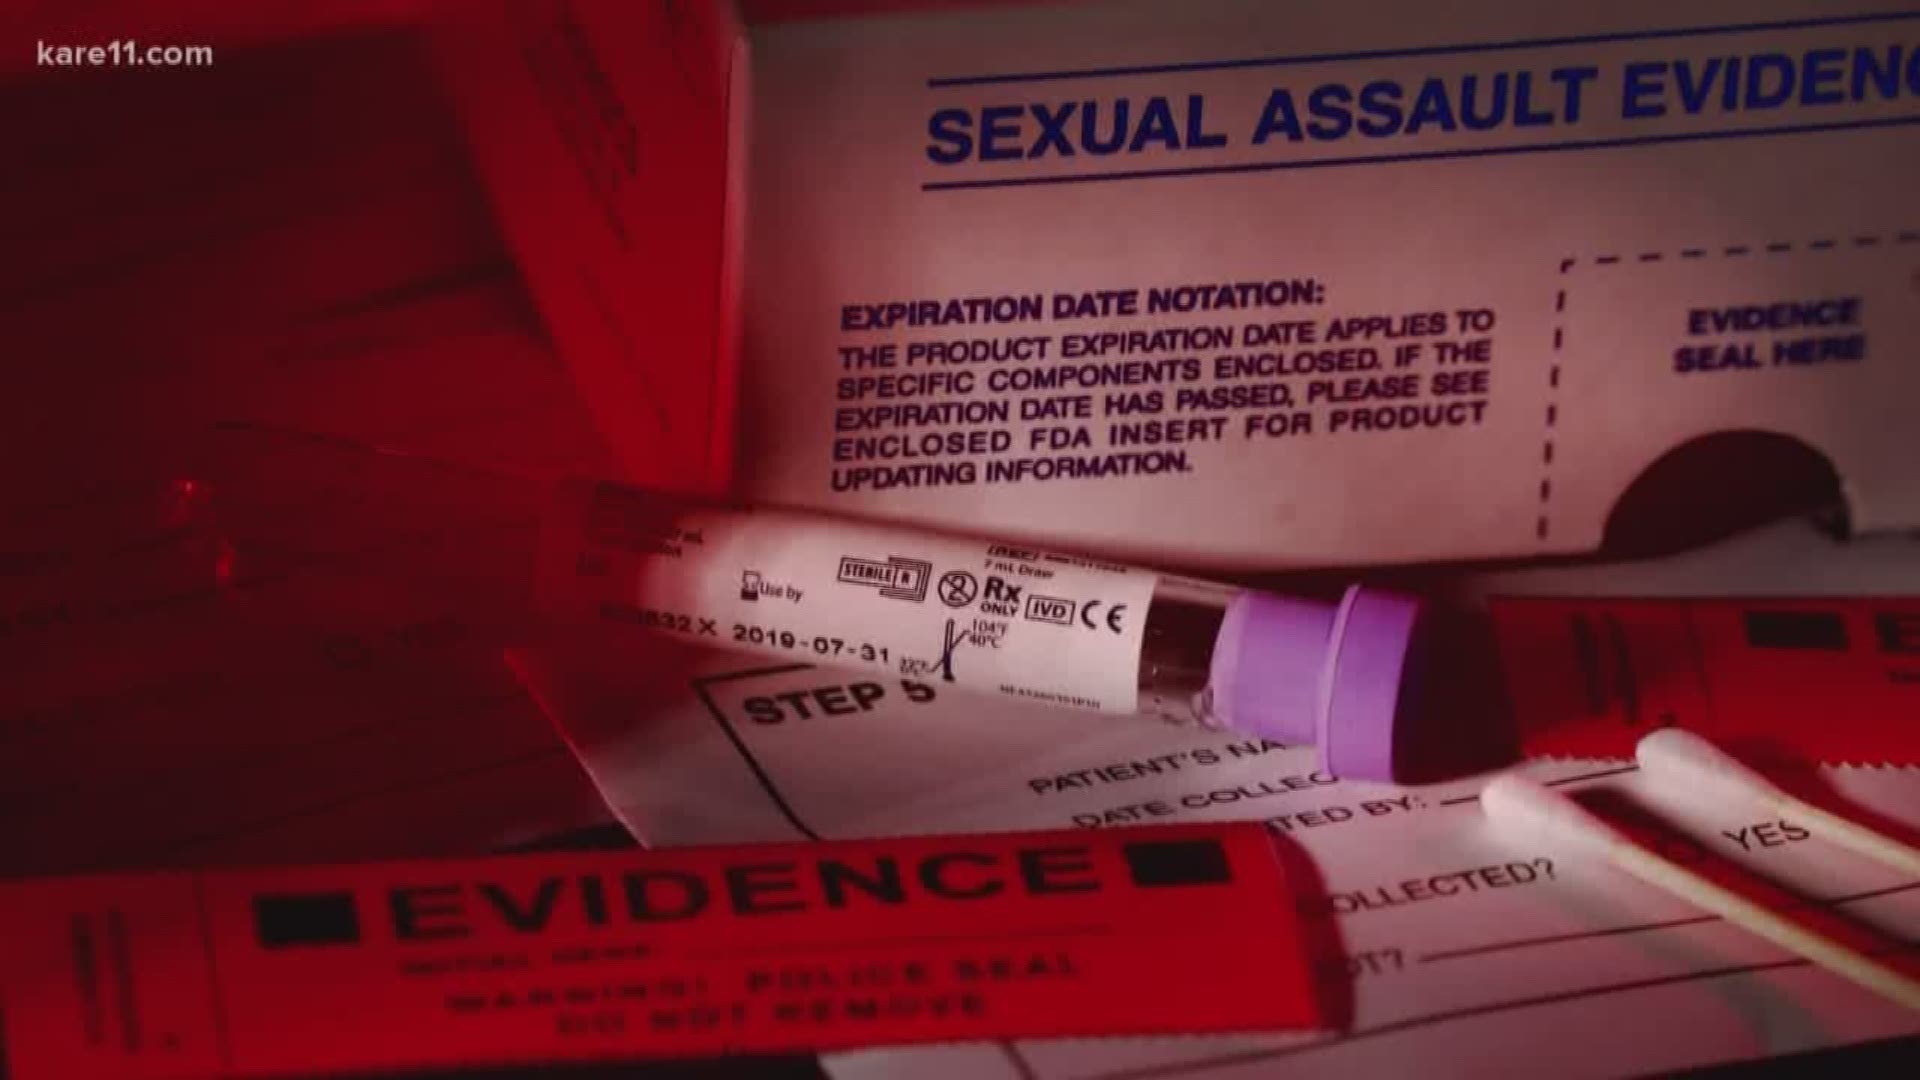 Records obtained by KARE 11 Investigates reveal Minnesota has additional rape kits – potentially several thousand of them – that were never fully tested, leaving crucial DNA information out of a nationwide database meant to catch serial predators.